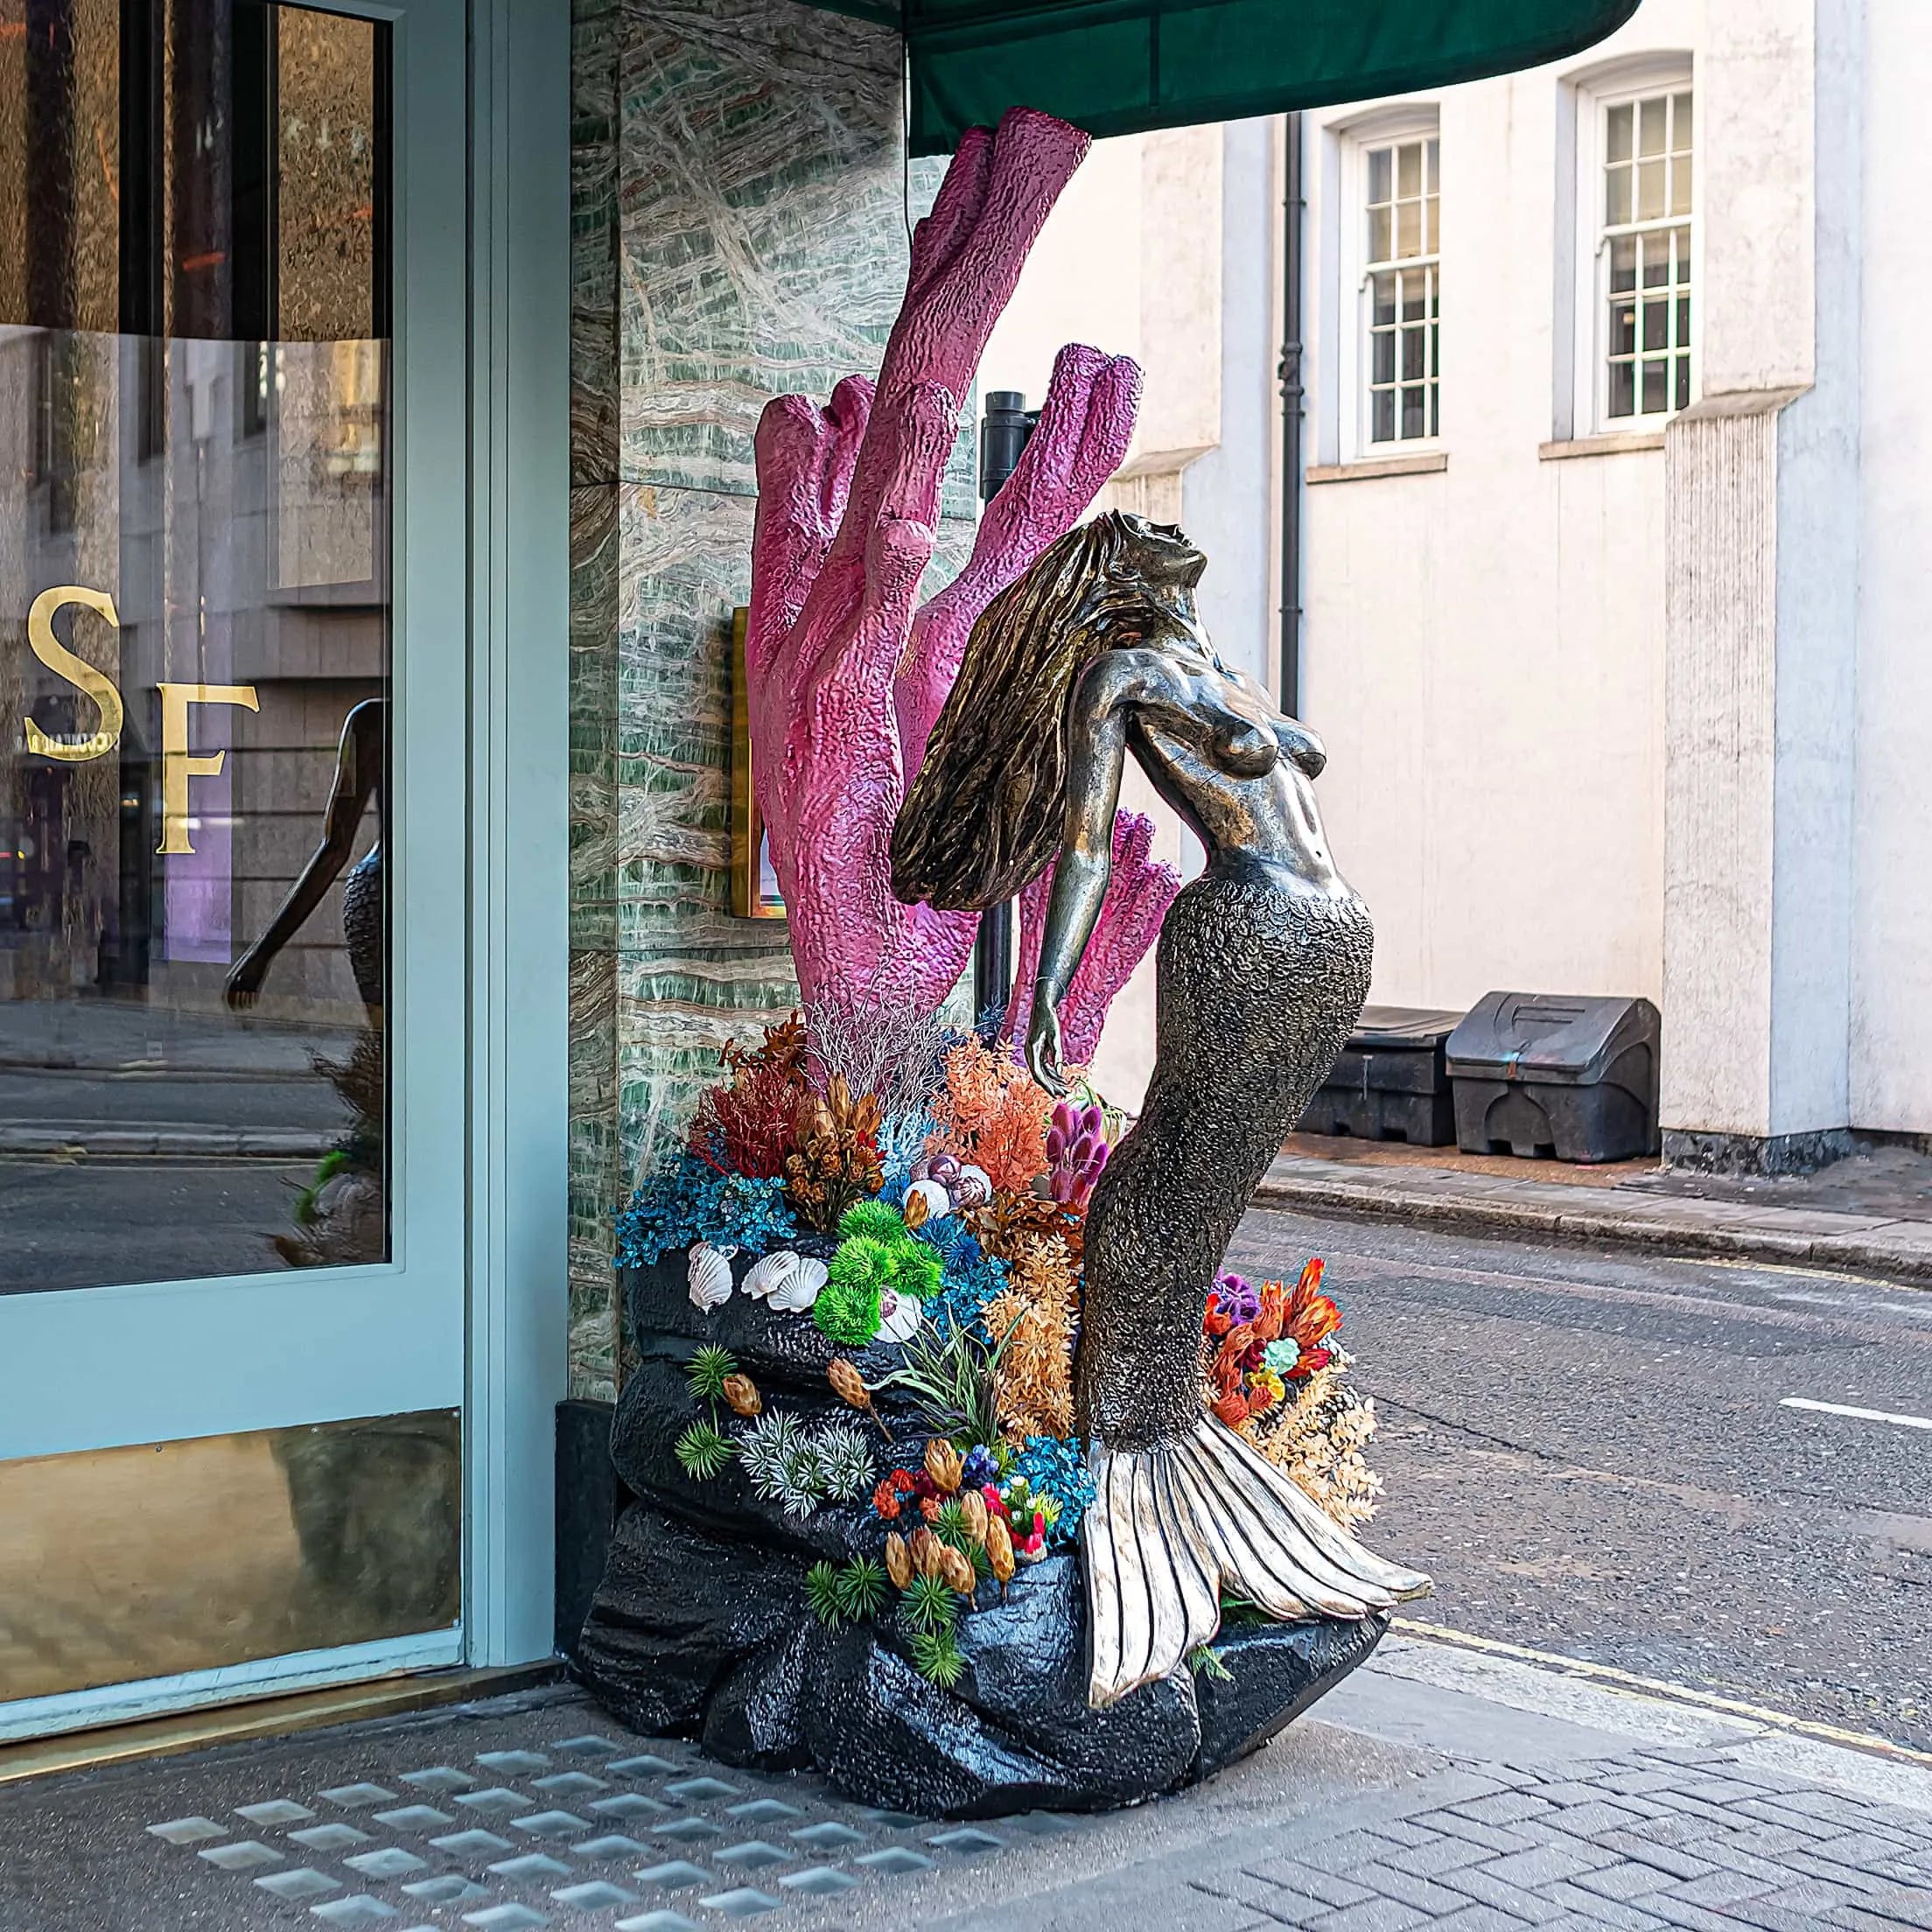 Exterior and interior bespoke floral installations created and installed for Sexy Fish as a part of their beautifully unique restaurant décor